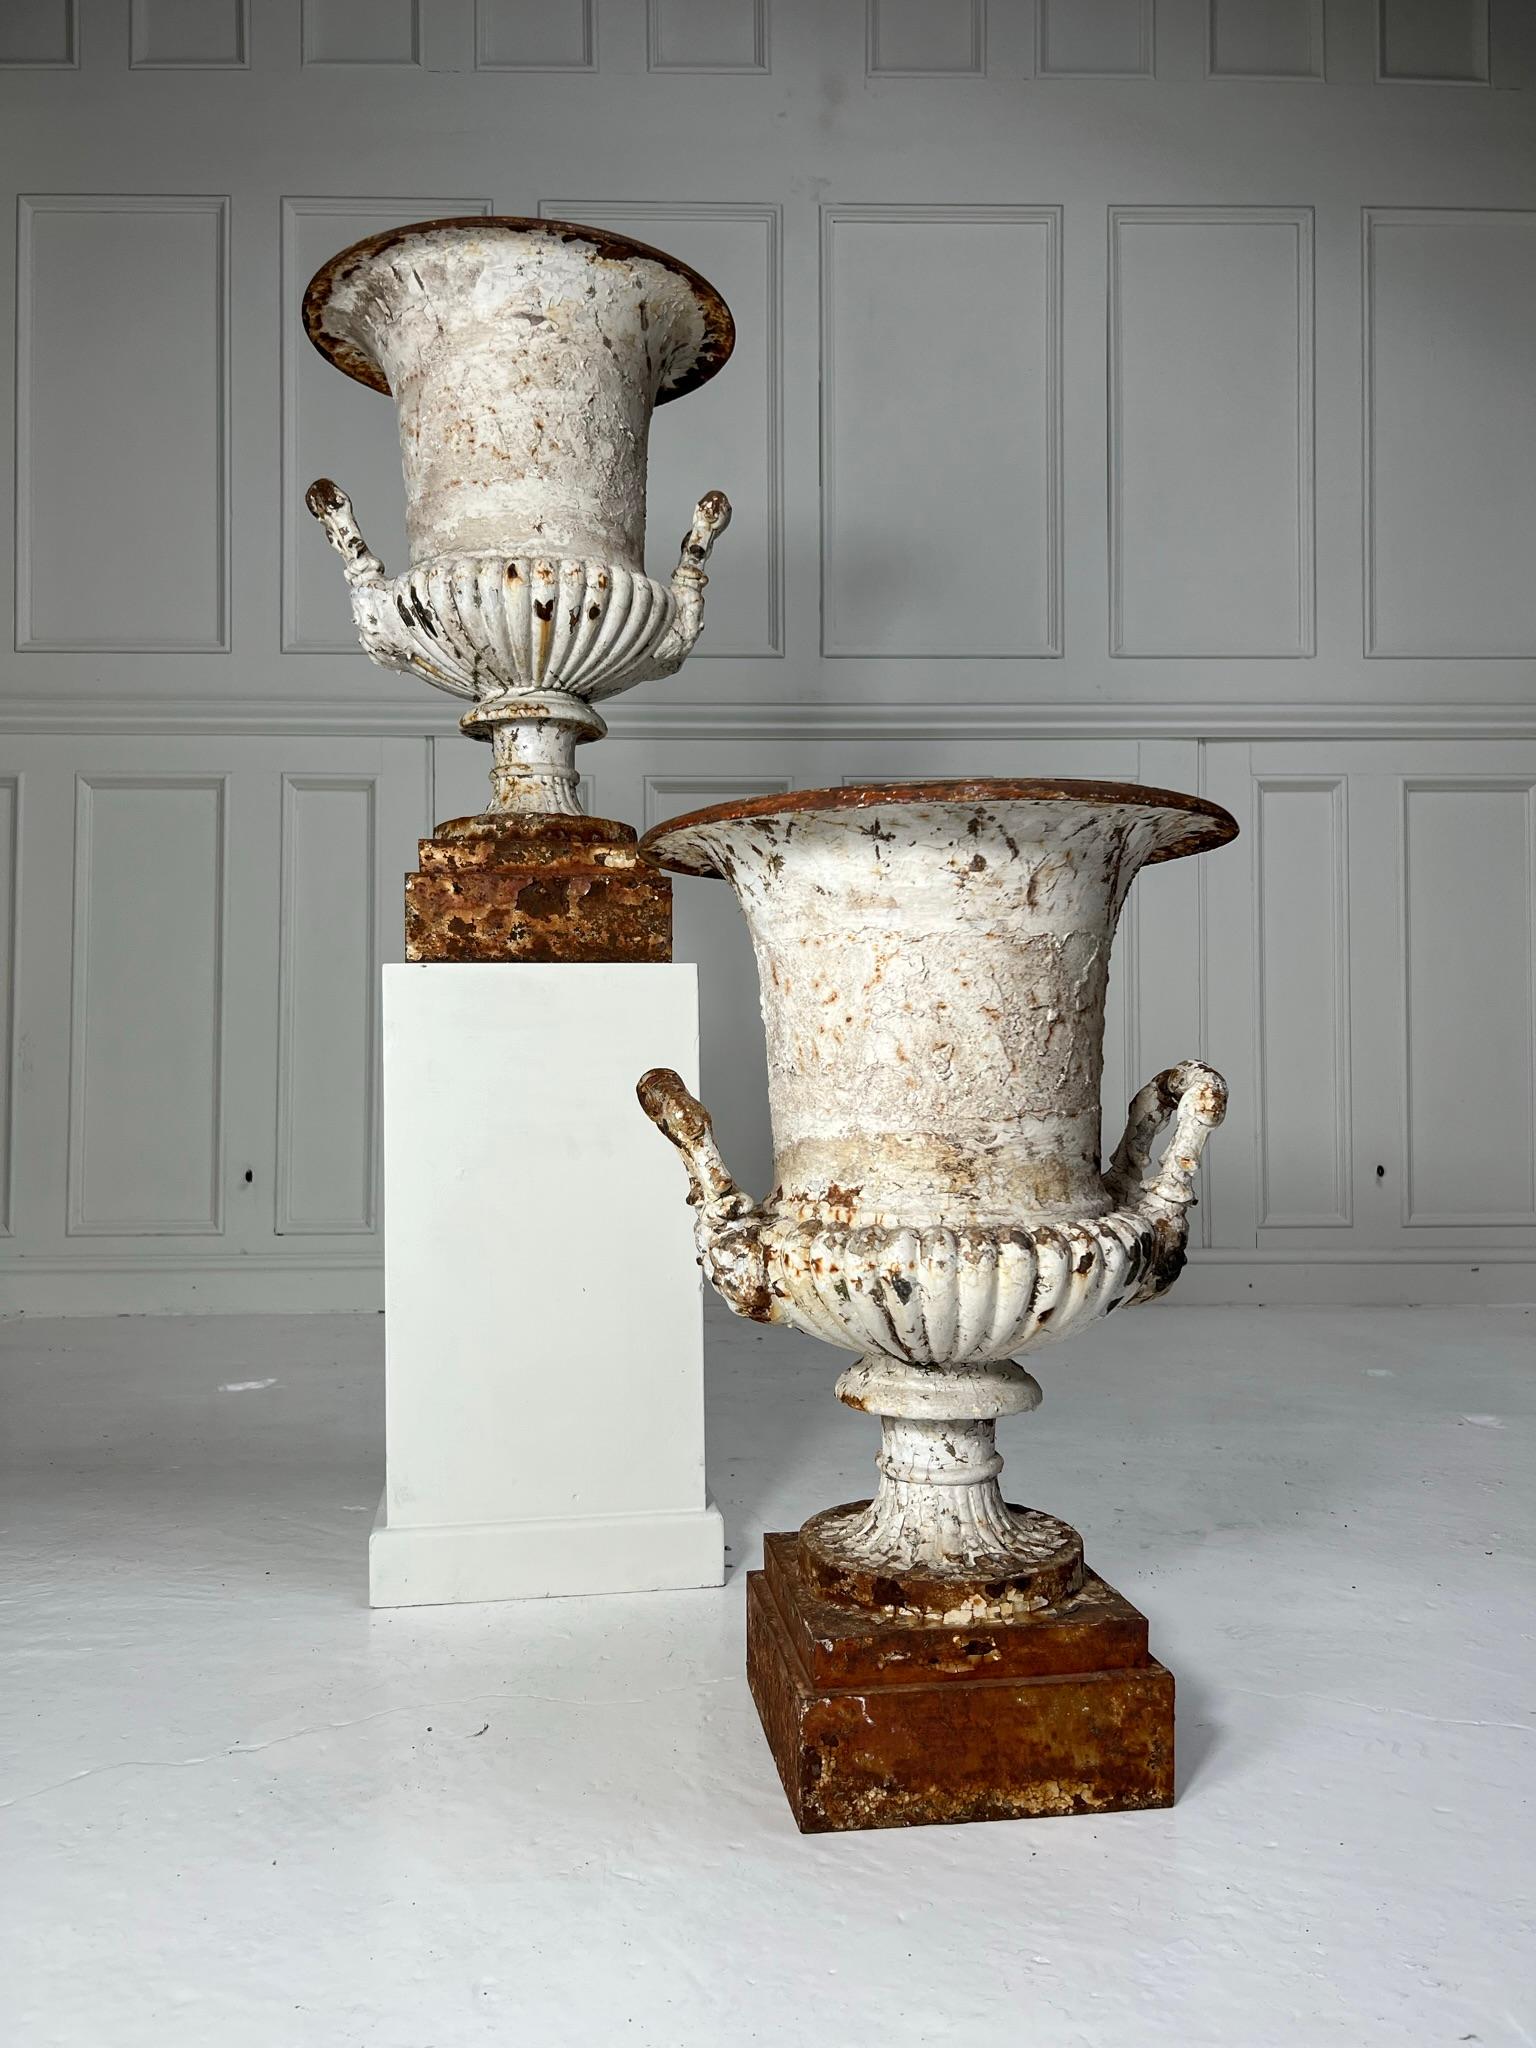 Pair of Coalbrookdale garden urn planters C1880.

This model was catalogued as the ‘Bell’ garden varse.

Square stepped base leading up to a gadrooned bowl with masked handles either side.

The quality of casting is superb and is visible on the